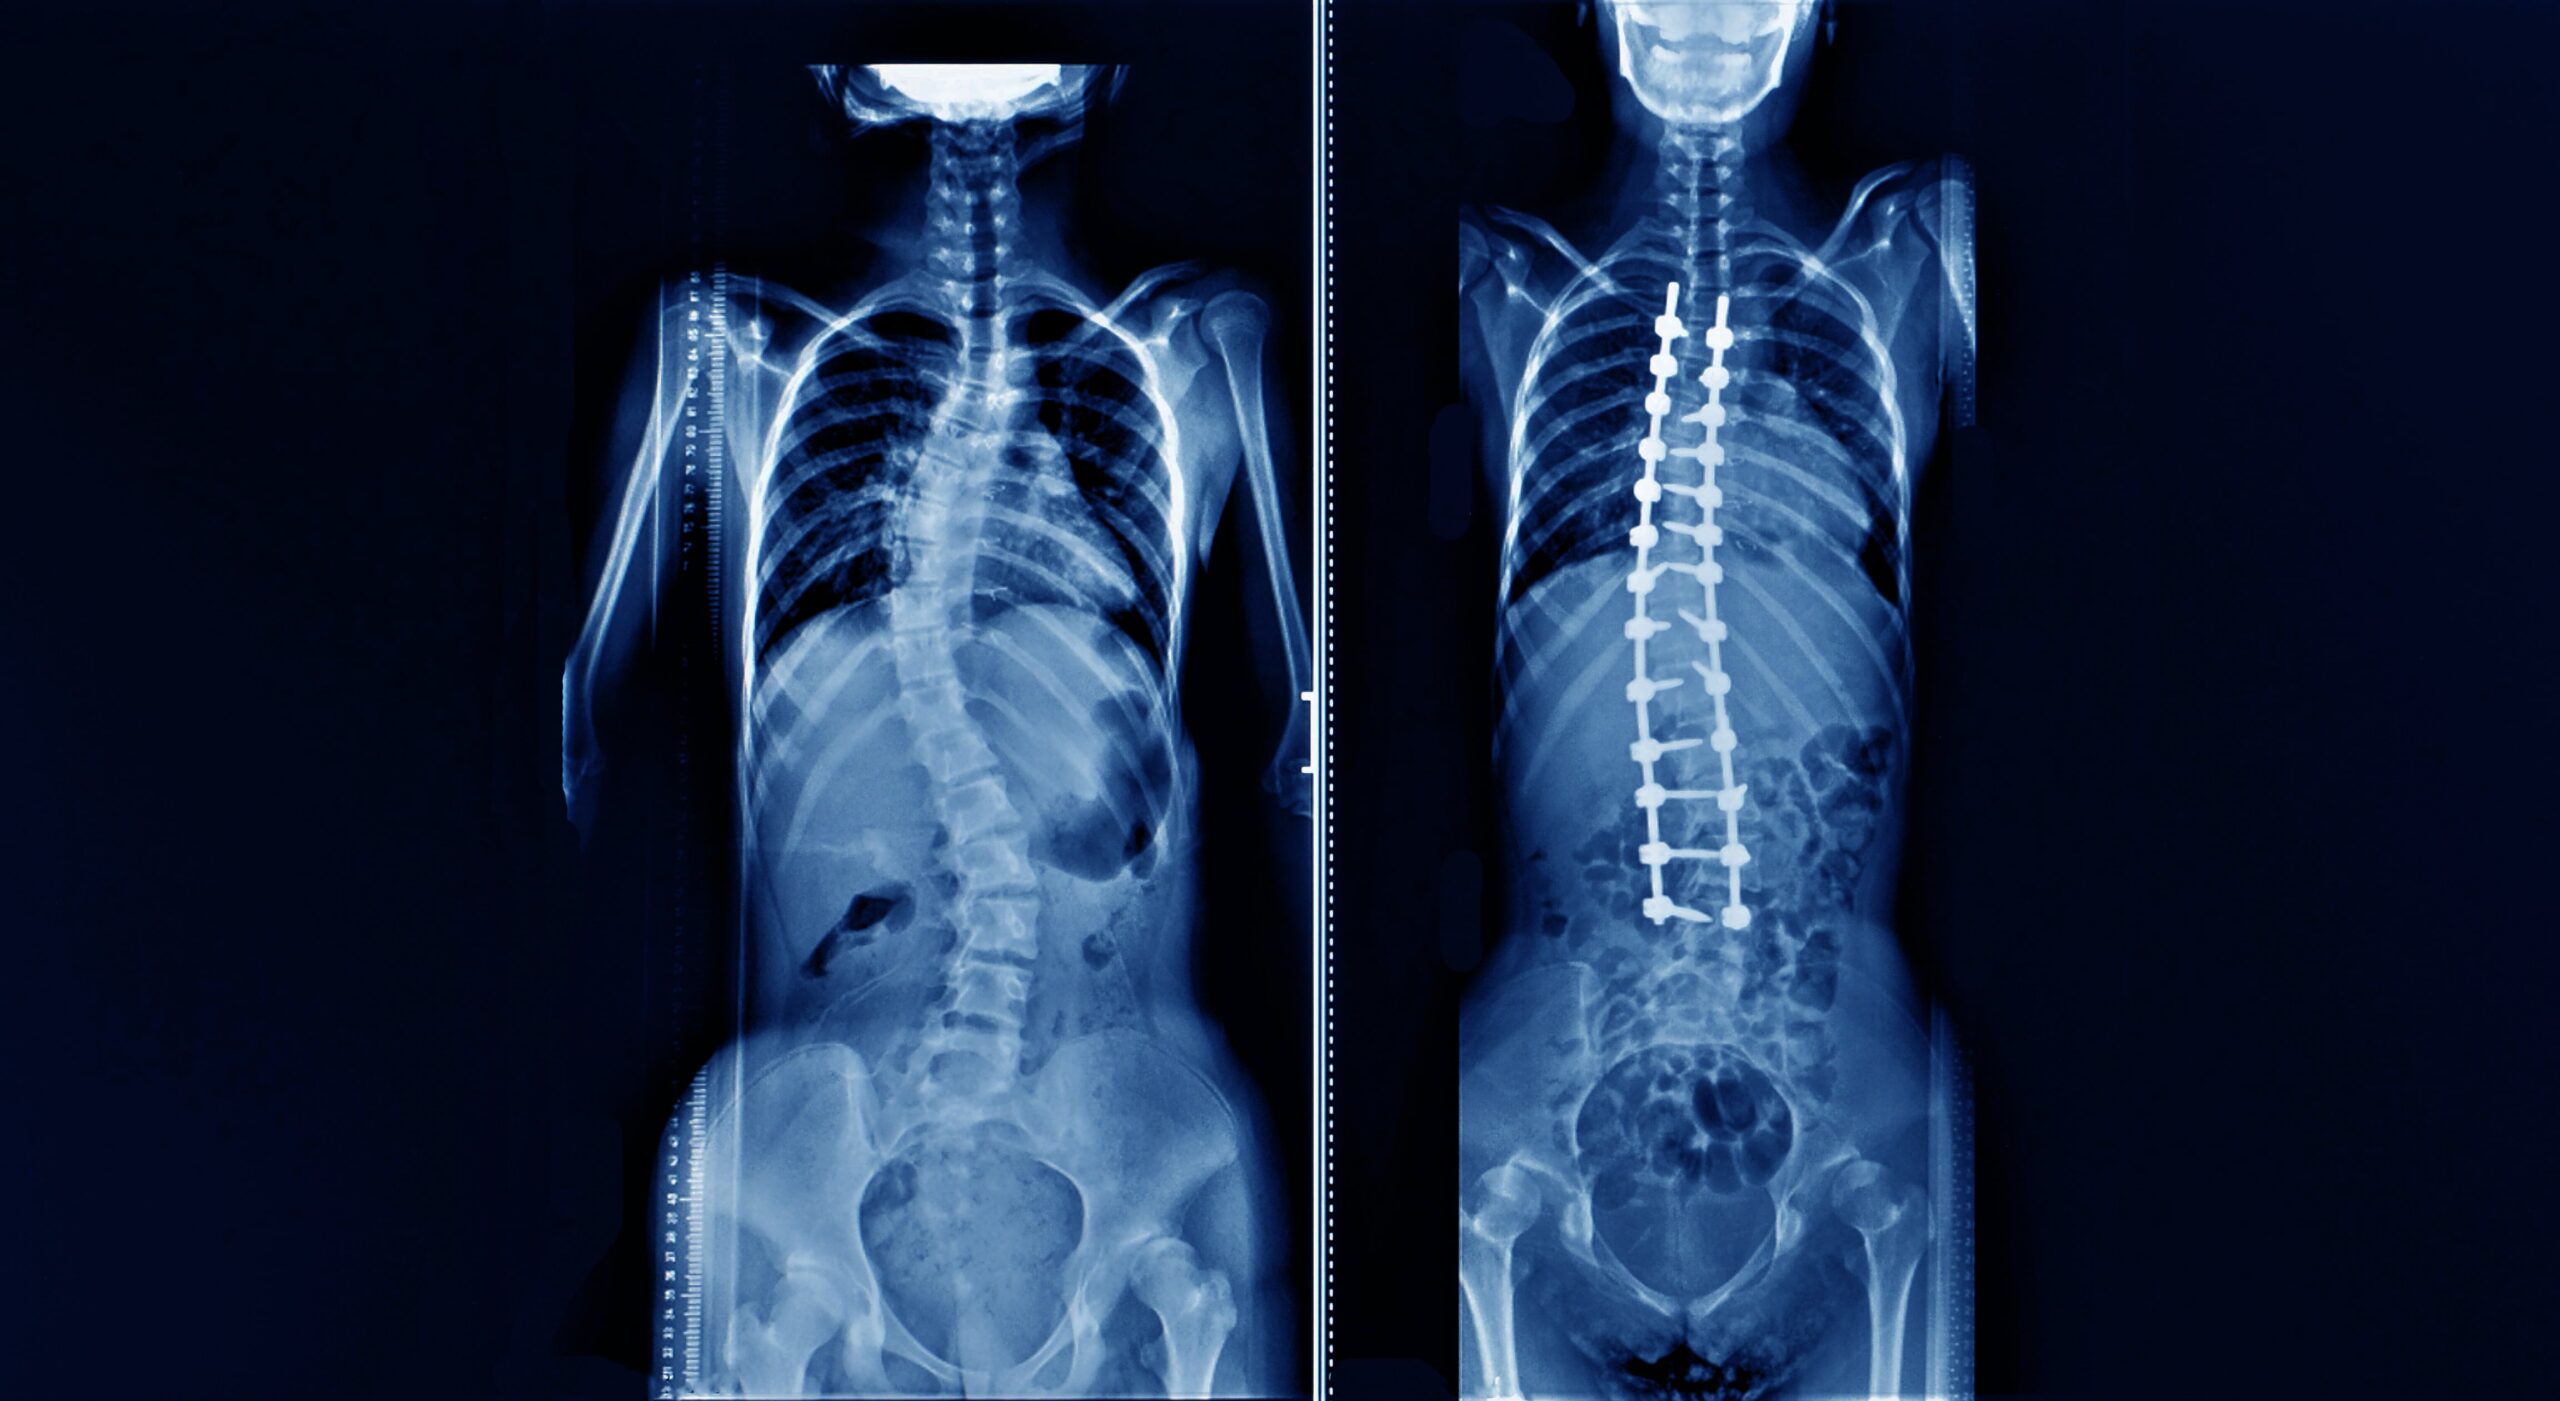 whole spine x-ray showing a patient with adolescent idiopathic scoliosis or AIS before and after correction deformity surgery.